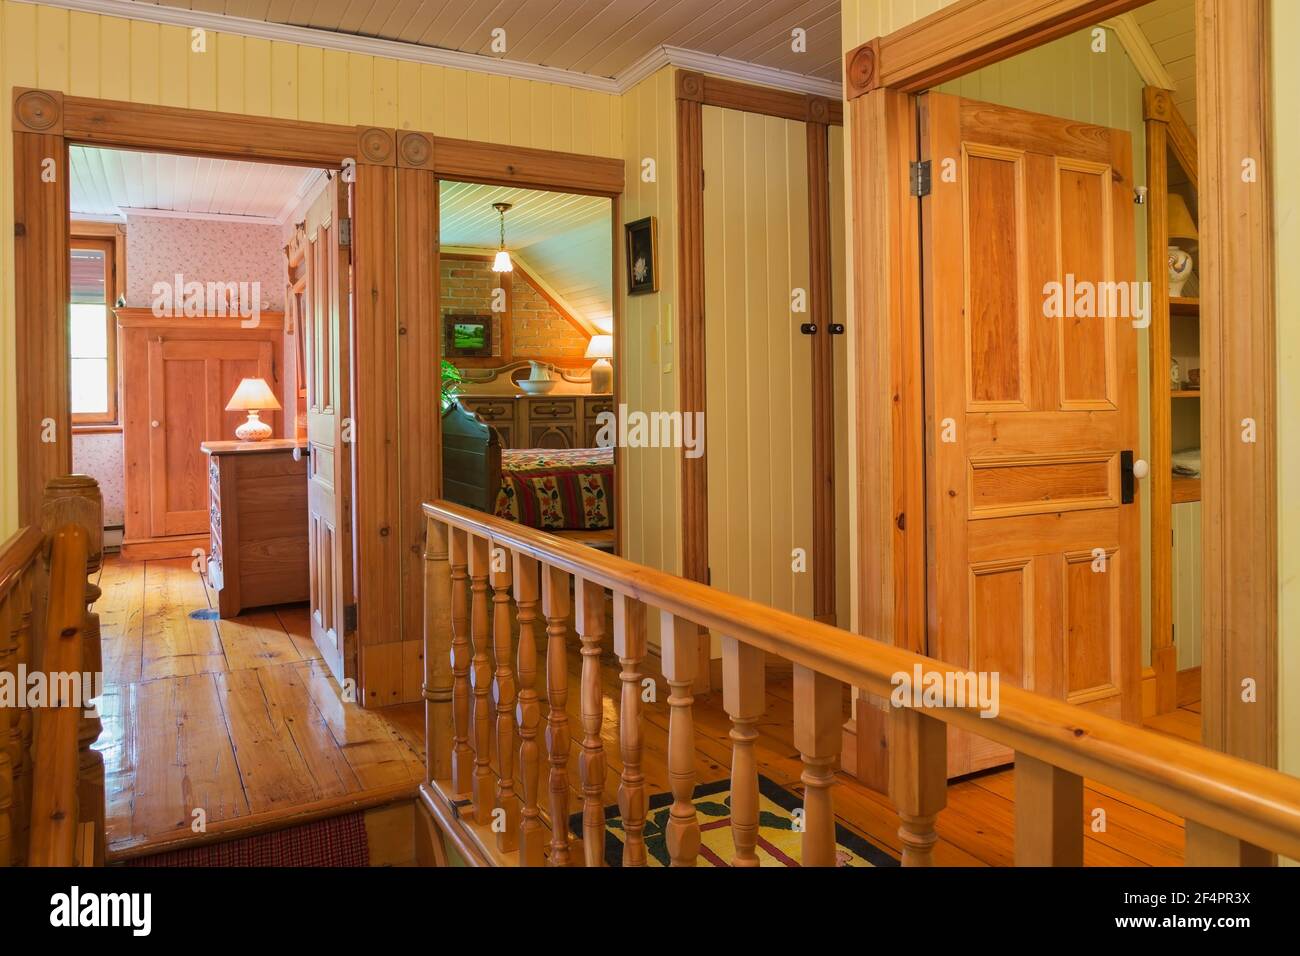 Hallway and opened doors of guest bedrooms and bathroom, maple wood staircase railing on upstairs floor with Eastern Hemlock floorboards in old home Stock Photo